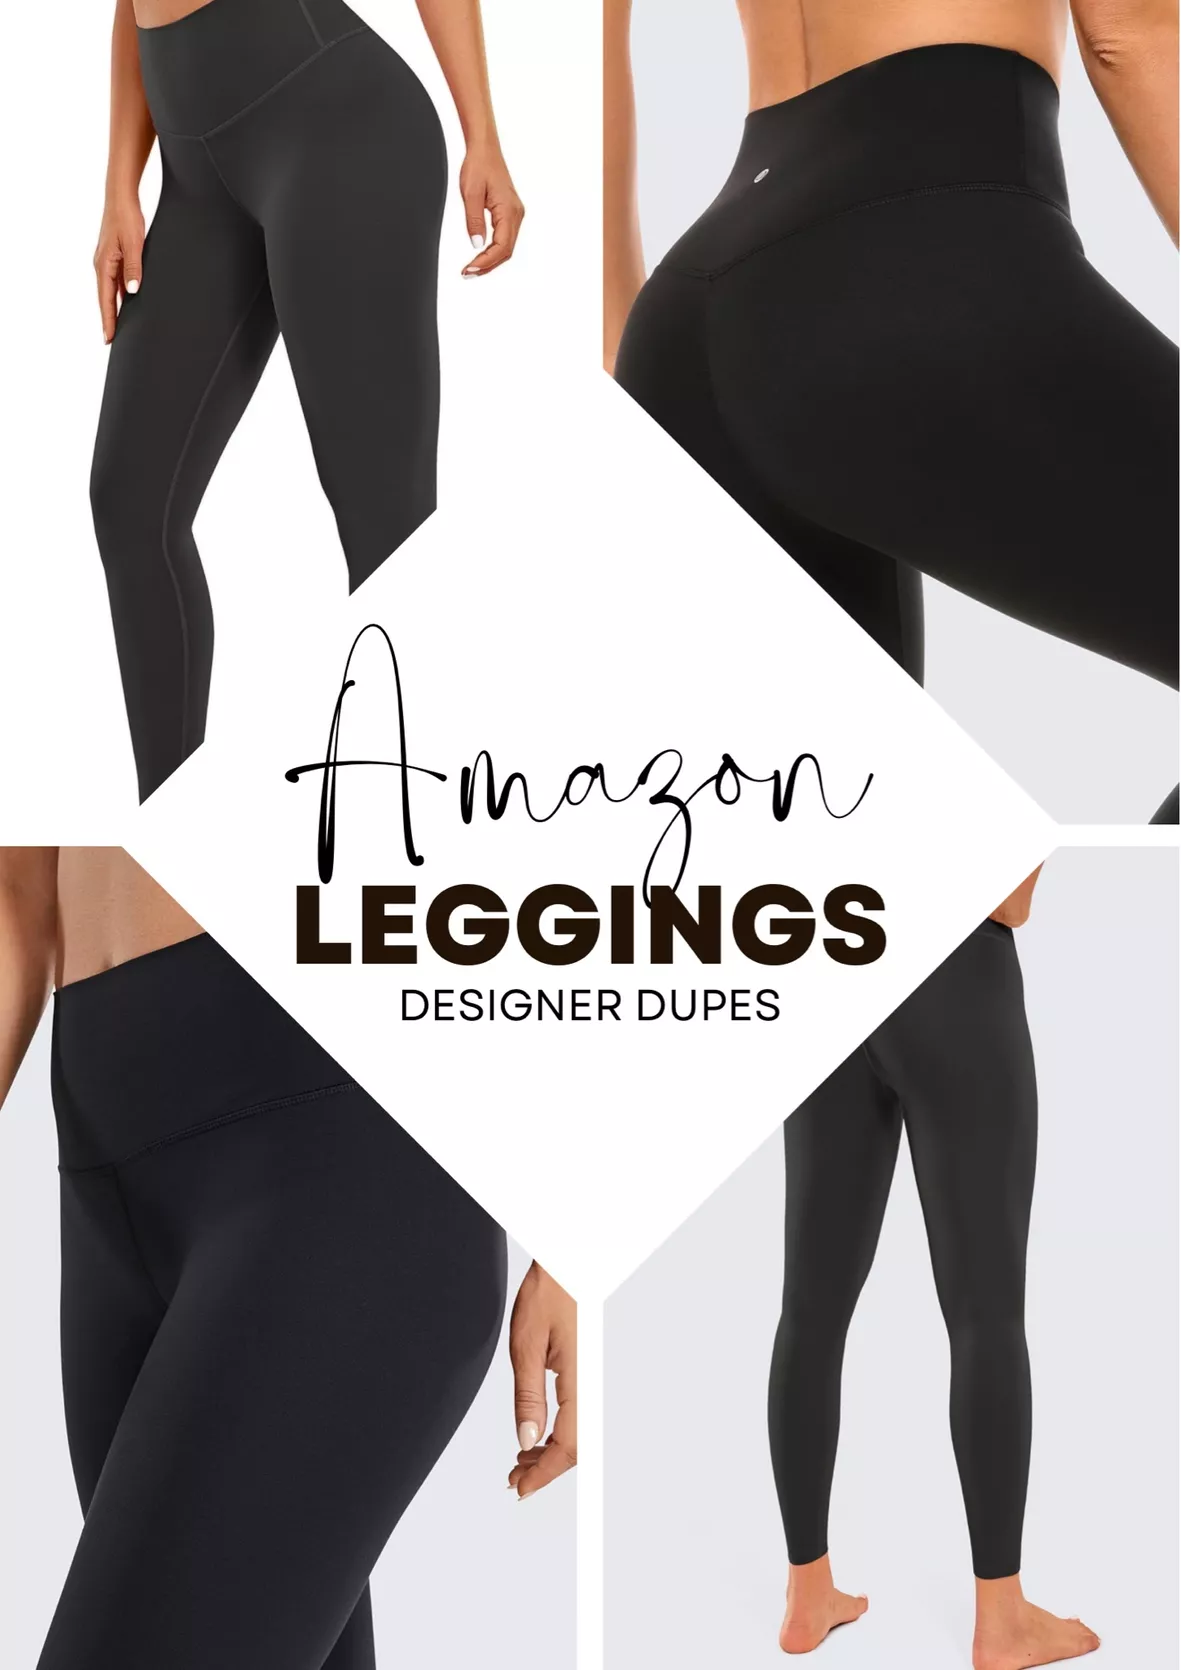 CRZ YOGA Butterluxe High Waisted Lounge Legging 25 - Workout Leggings for  Women Buttery Soft Yoga Pants in 2023